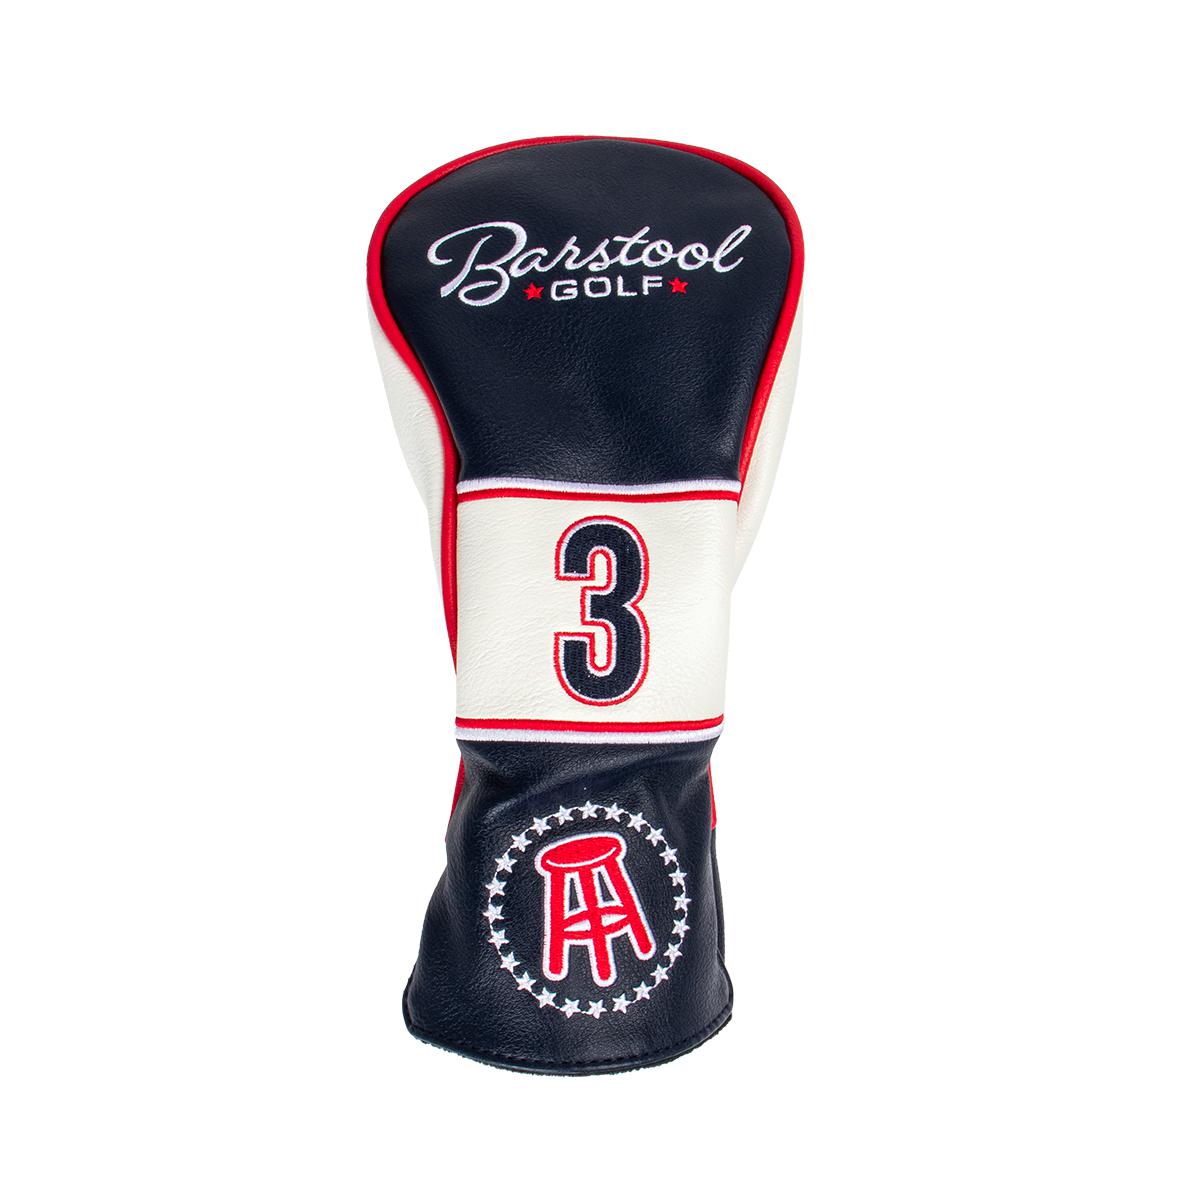 Barstool Golf Fairway Headcover-Golf Accessories-Fore Play-Navy-One Size-Barstool Sports